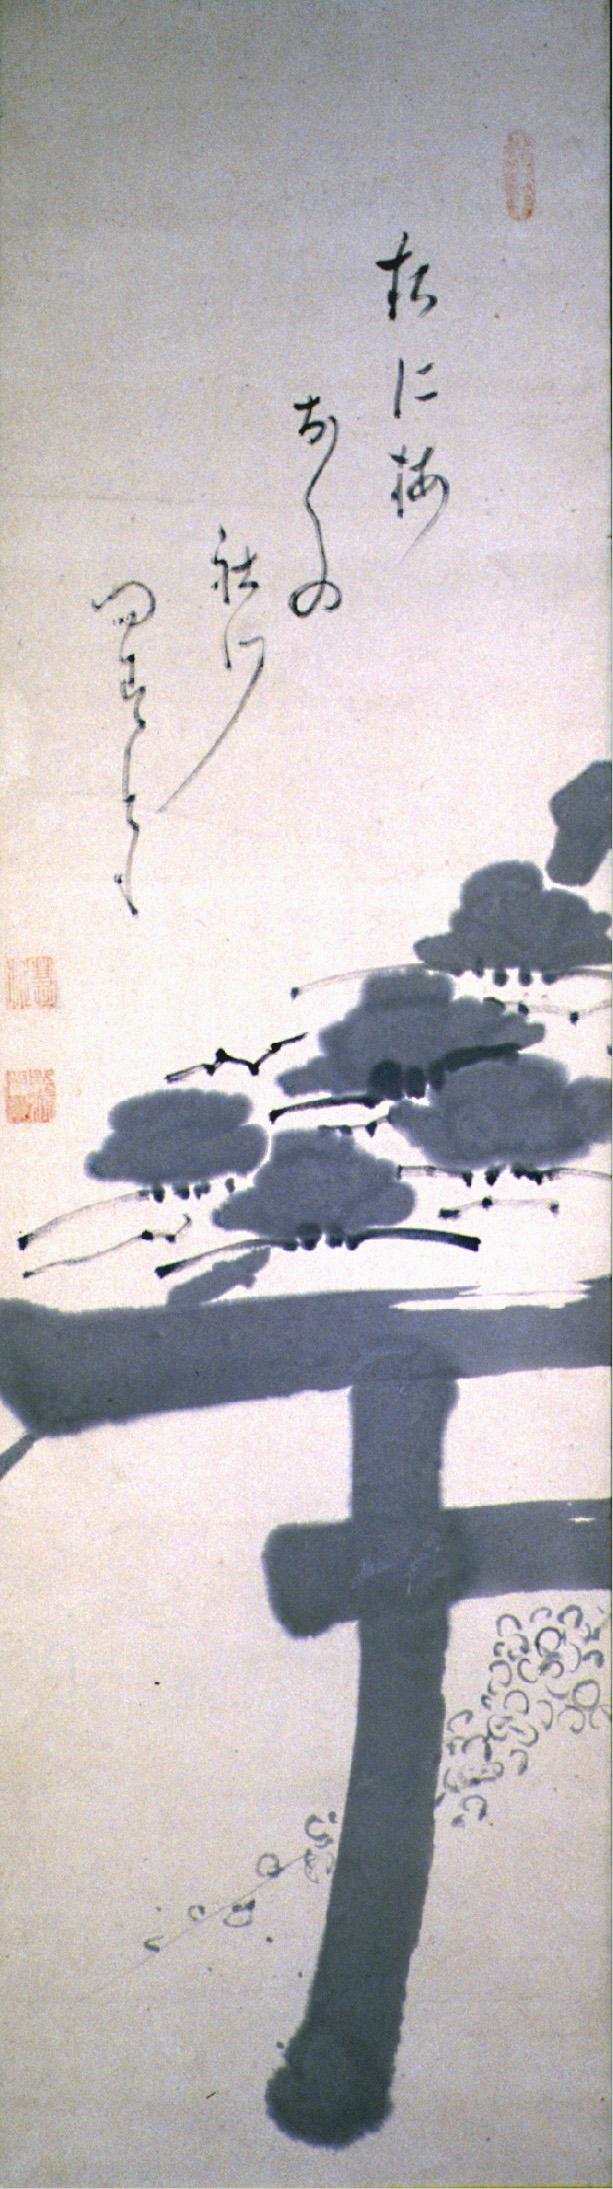 “The Shrine of Tenjin,” Edo period (1615–1868), Reigen Eto 霊源慧桃. Hanging scroll, ink on paper, 39 3/16 inches by 10 7/8 inches. (Princeton University Art Museum)